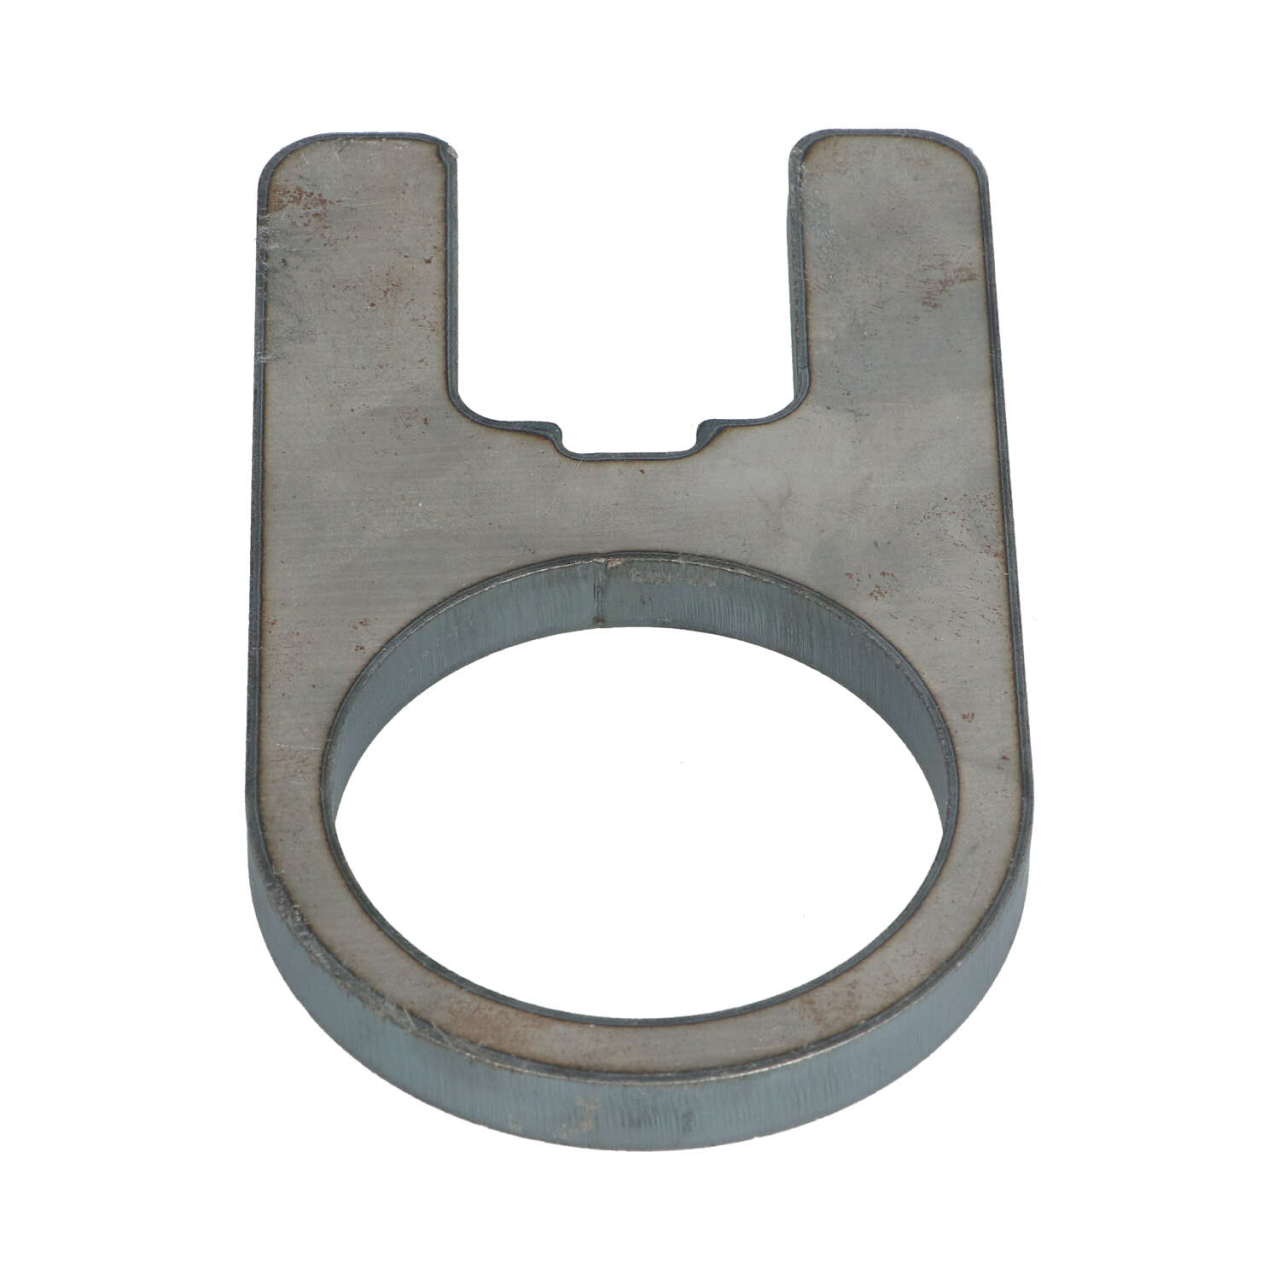 Wing arm ball joint plate